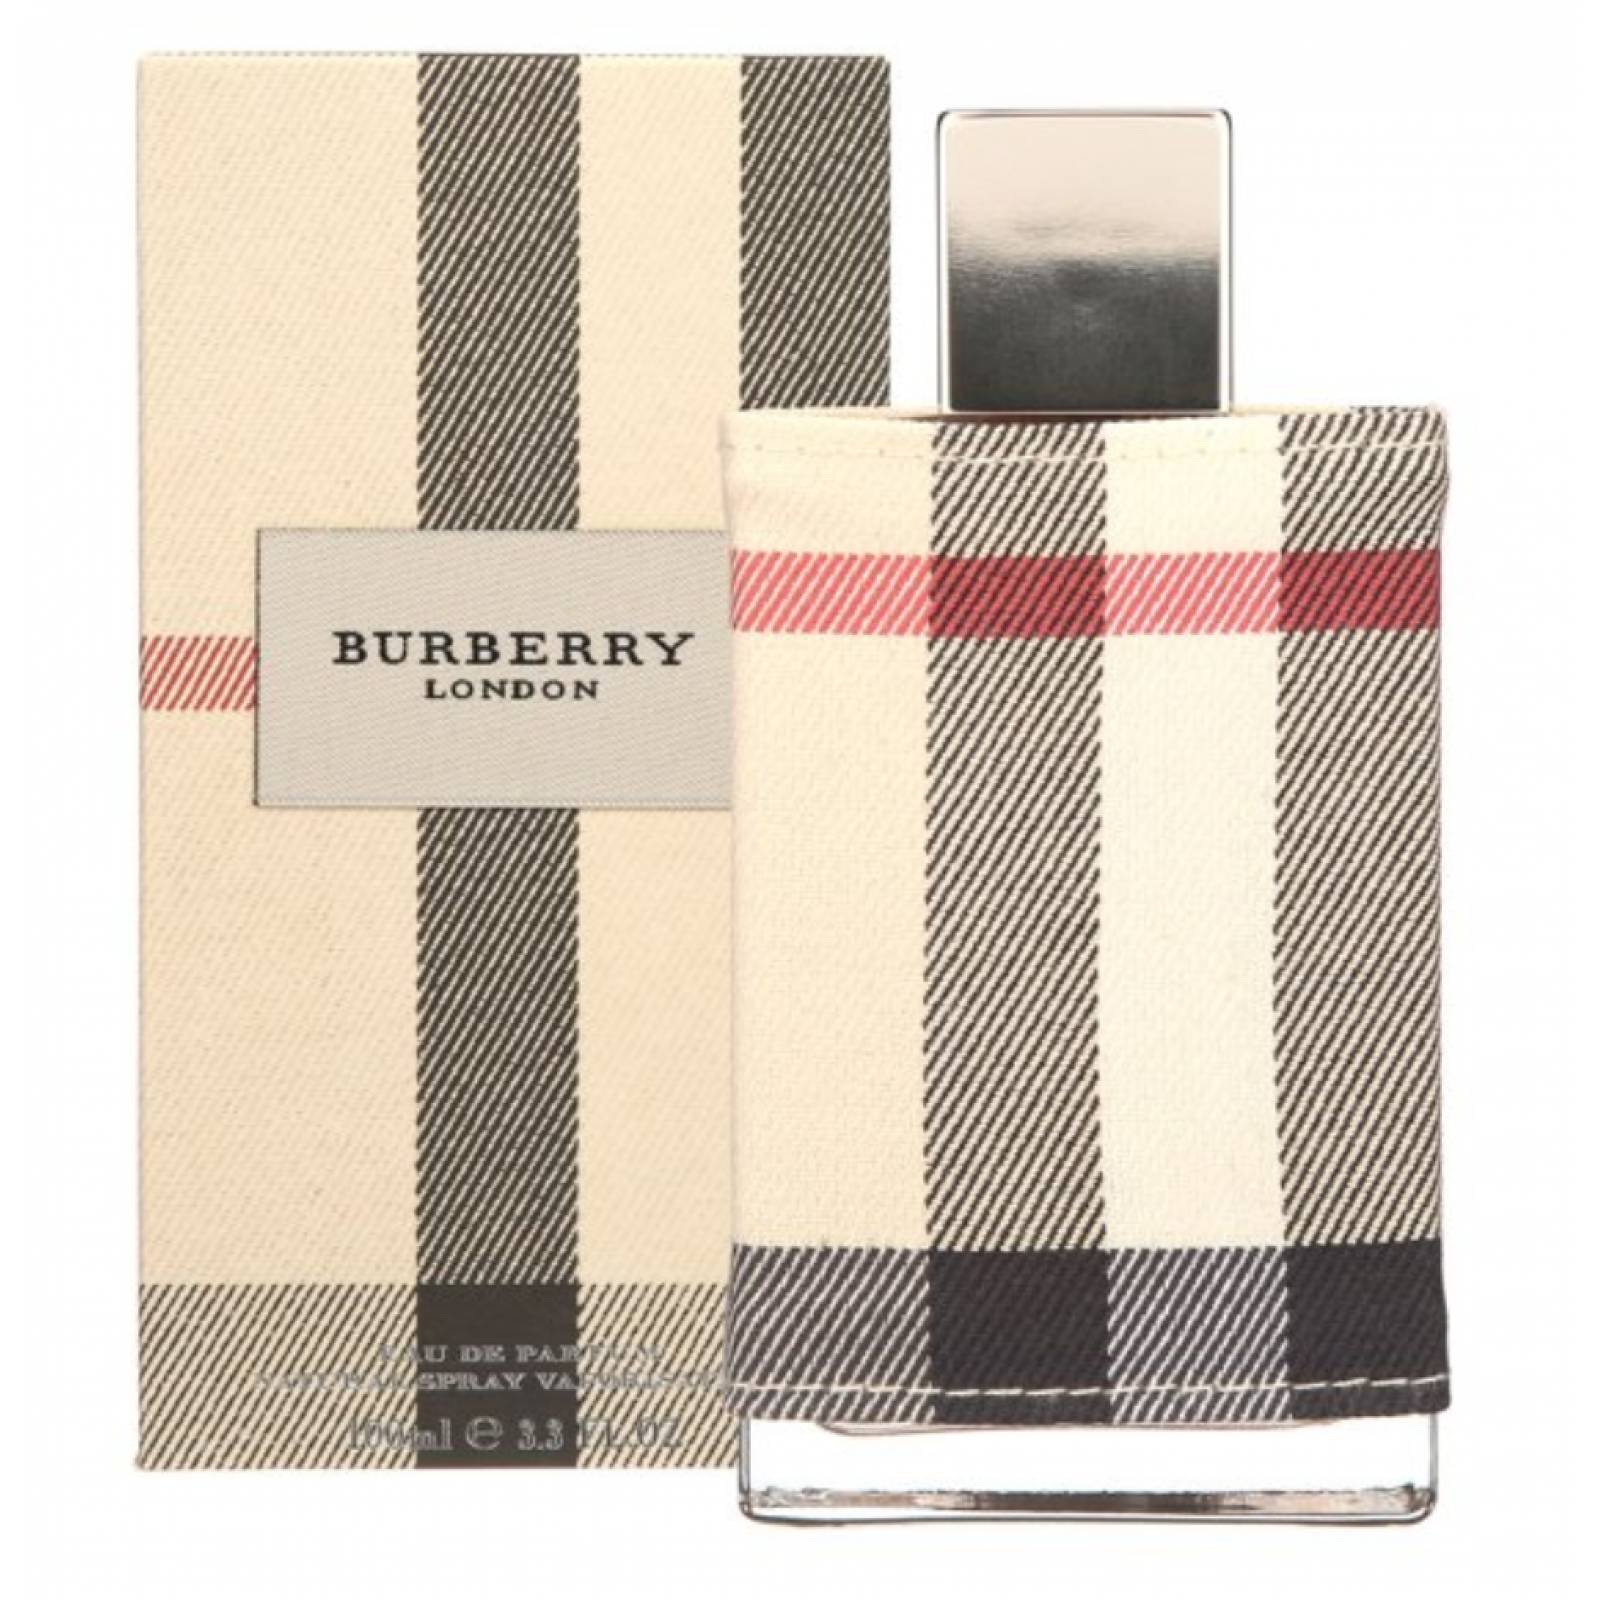 distribuidor burberry mexico,Limited Time Offer,iokonic.in